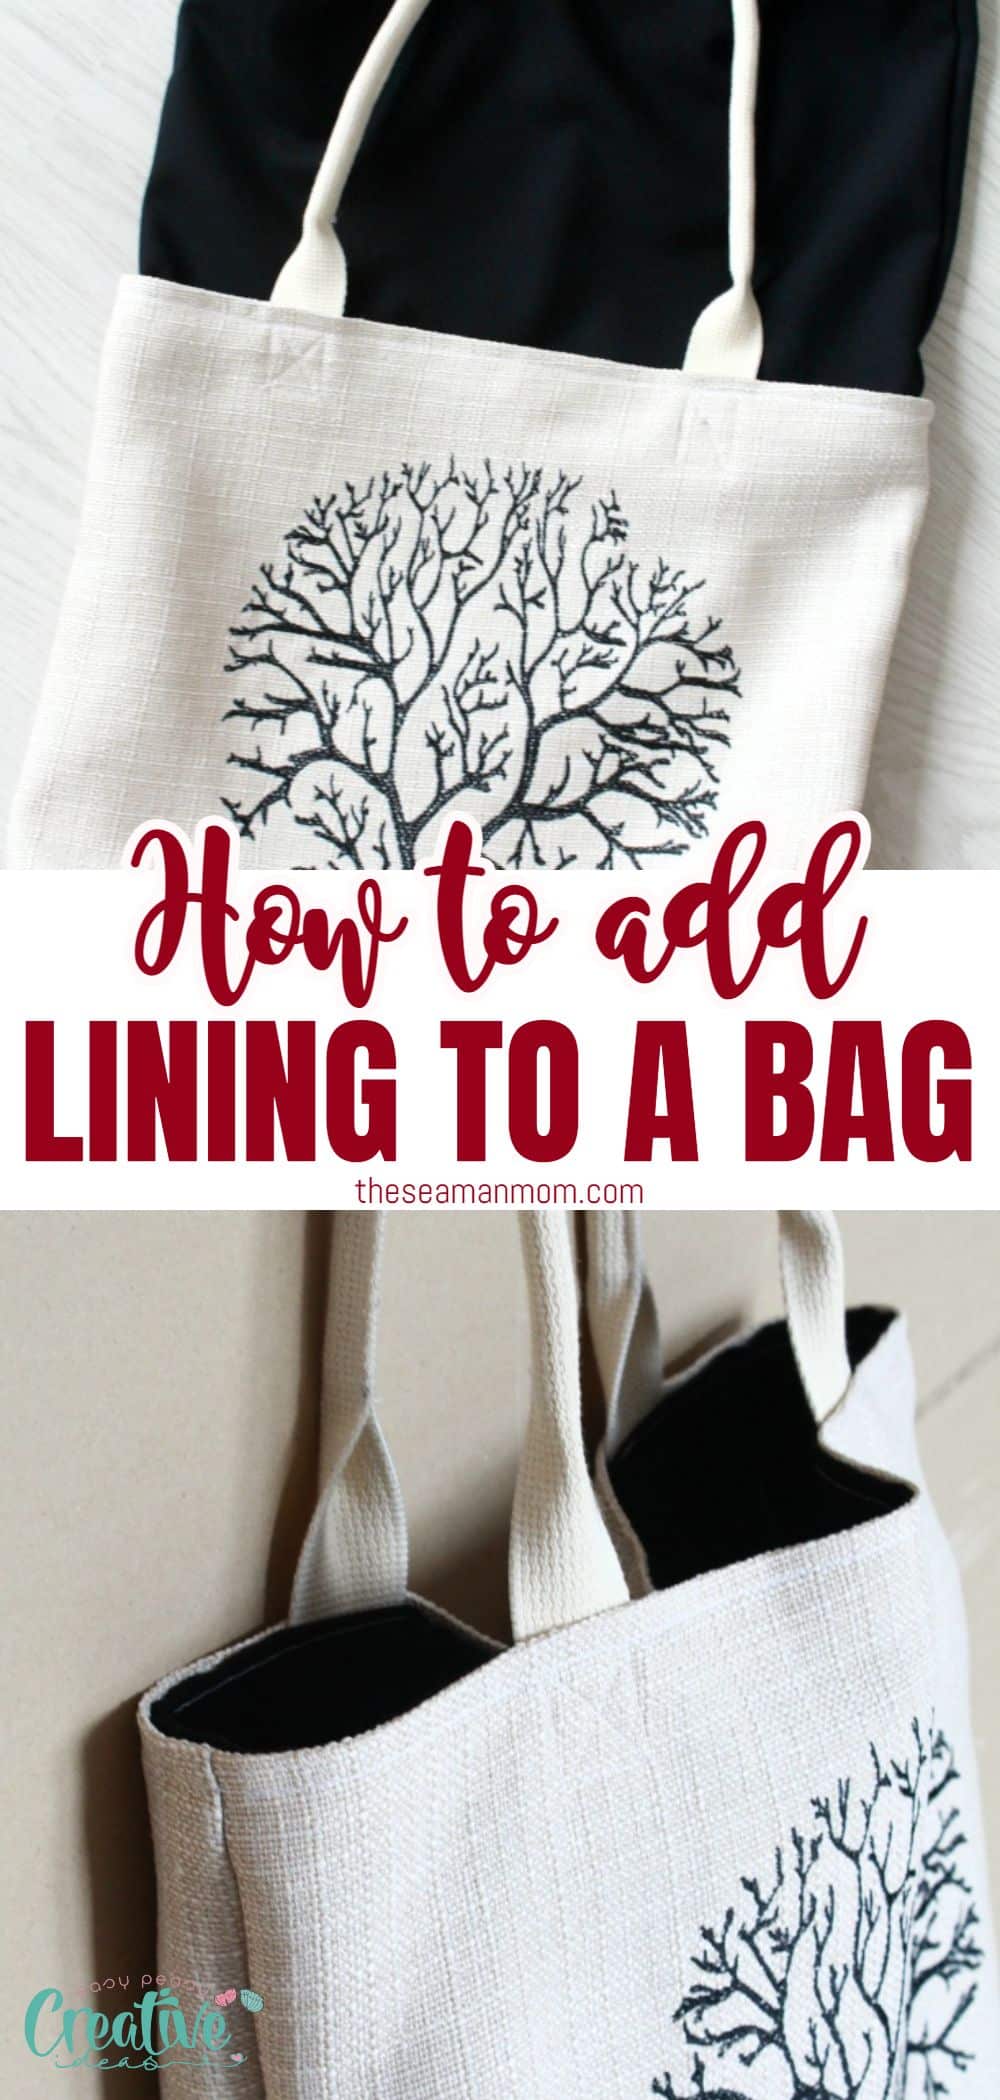 There are various ways for lining a bag! In this sewing tutorial you'll learn how to line a bag using the simplest method that works for almost any style of purse! Bag lining has never been easier!
 via @petroneagu